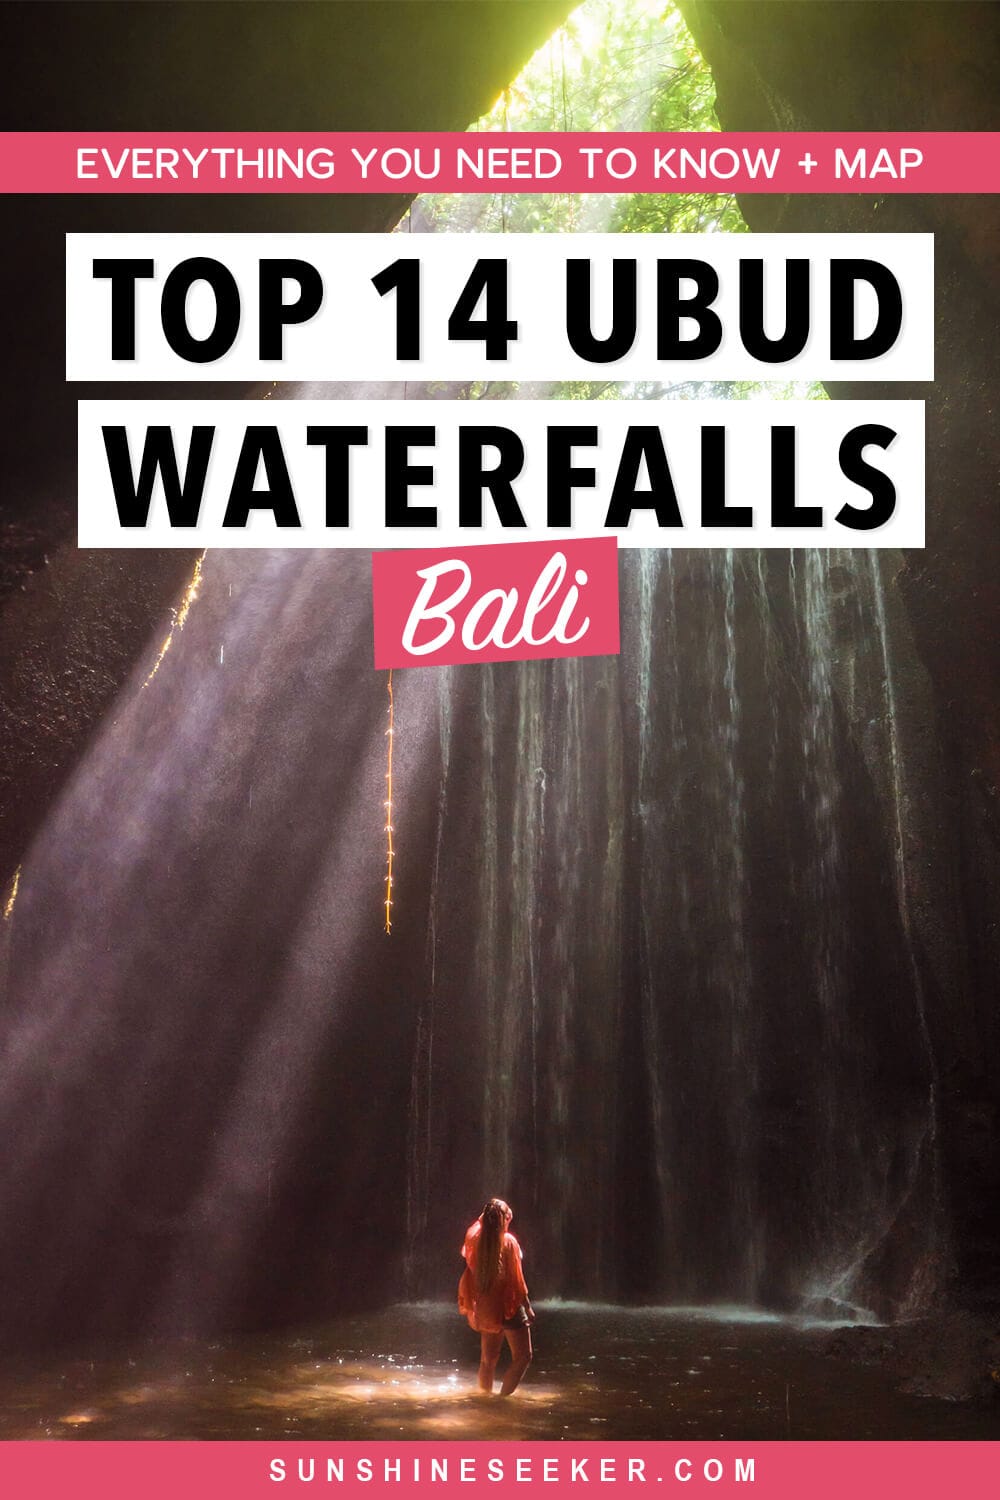 Discover 14 of the most beautiful waterfalls in and around Ubud, Bali! From Tukad Cepung and Leke Leke to a few hidden gems I bet you haven't even heard of. These are all the best waterfalls in Ubud.